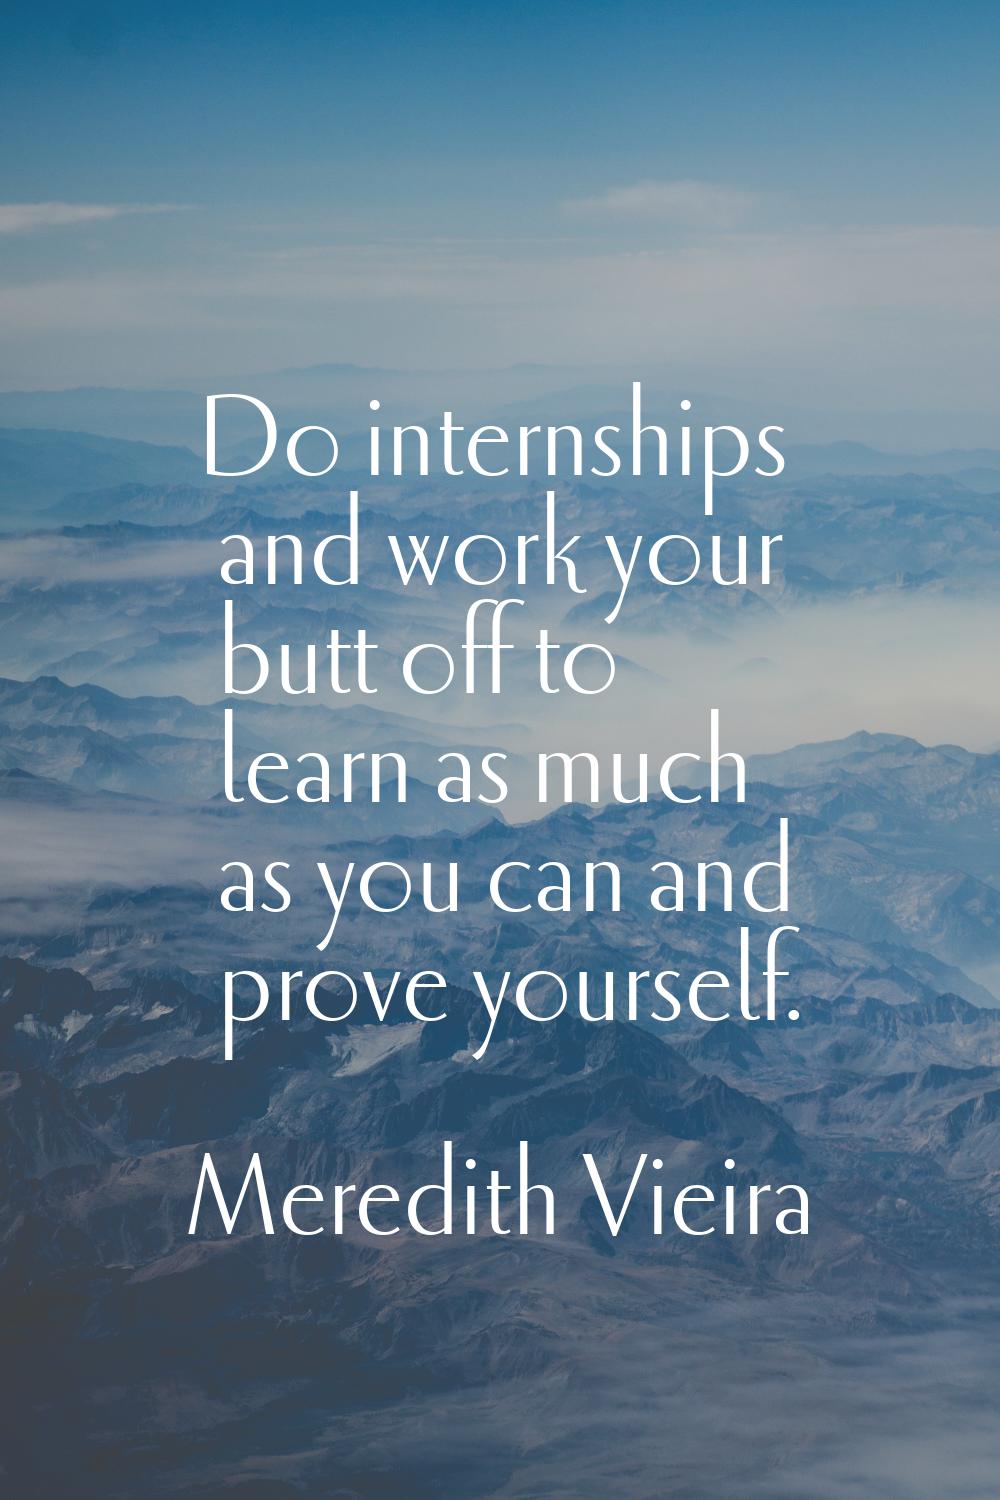 Do internships and work your butt off to learn as much as you can and prove yourself.